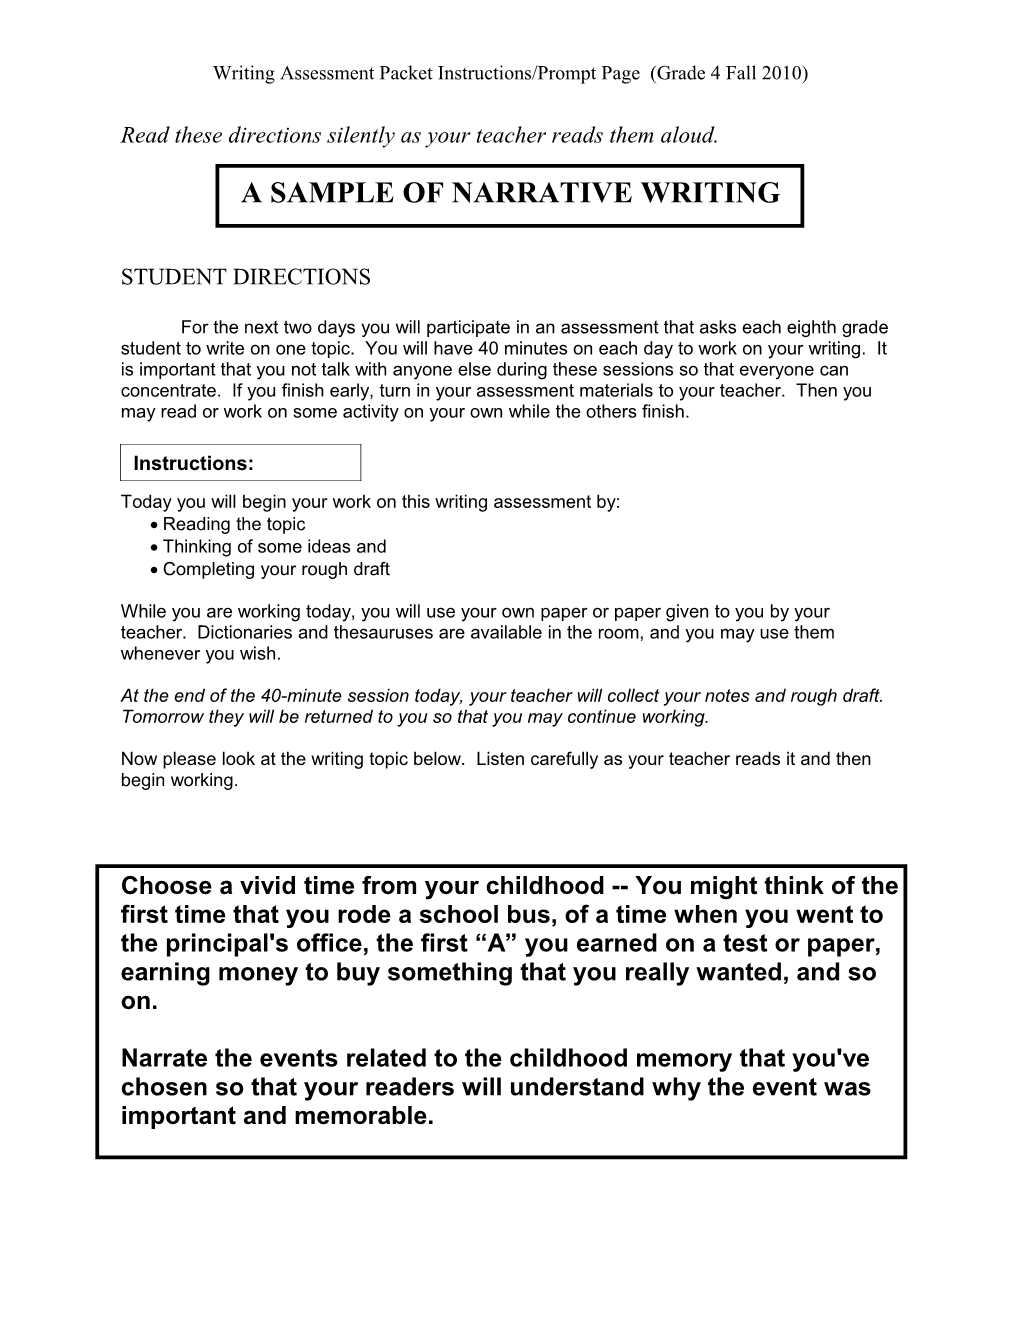 Writing Assessment Packet Instructions/Prompt Page (Grade 4 Fall 2010)